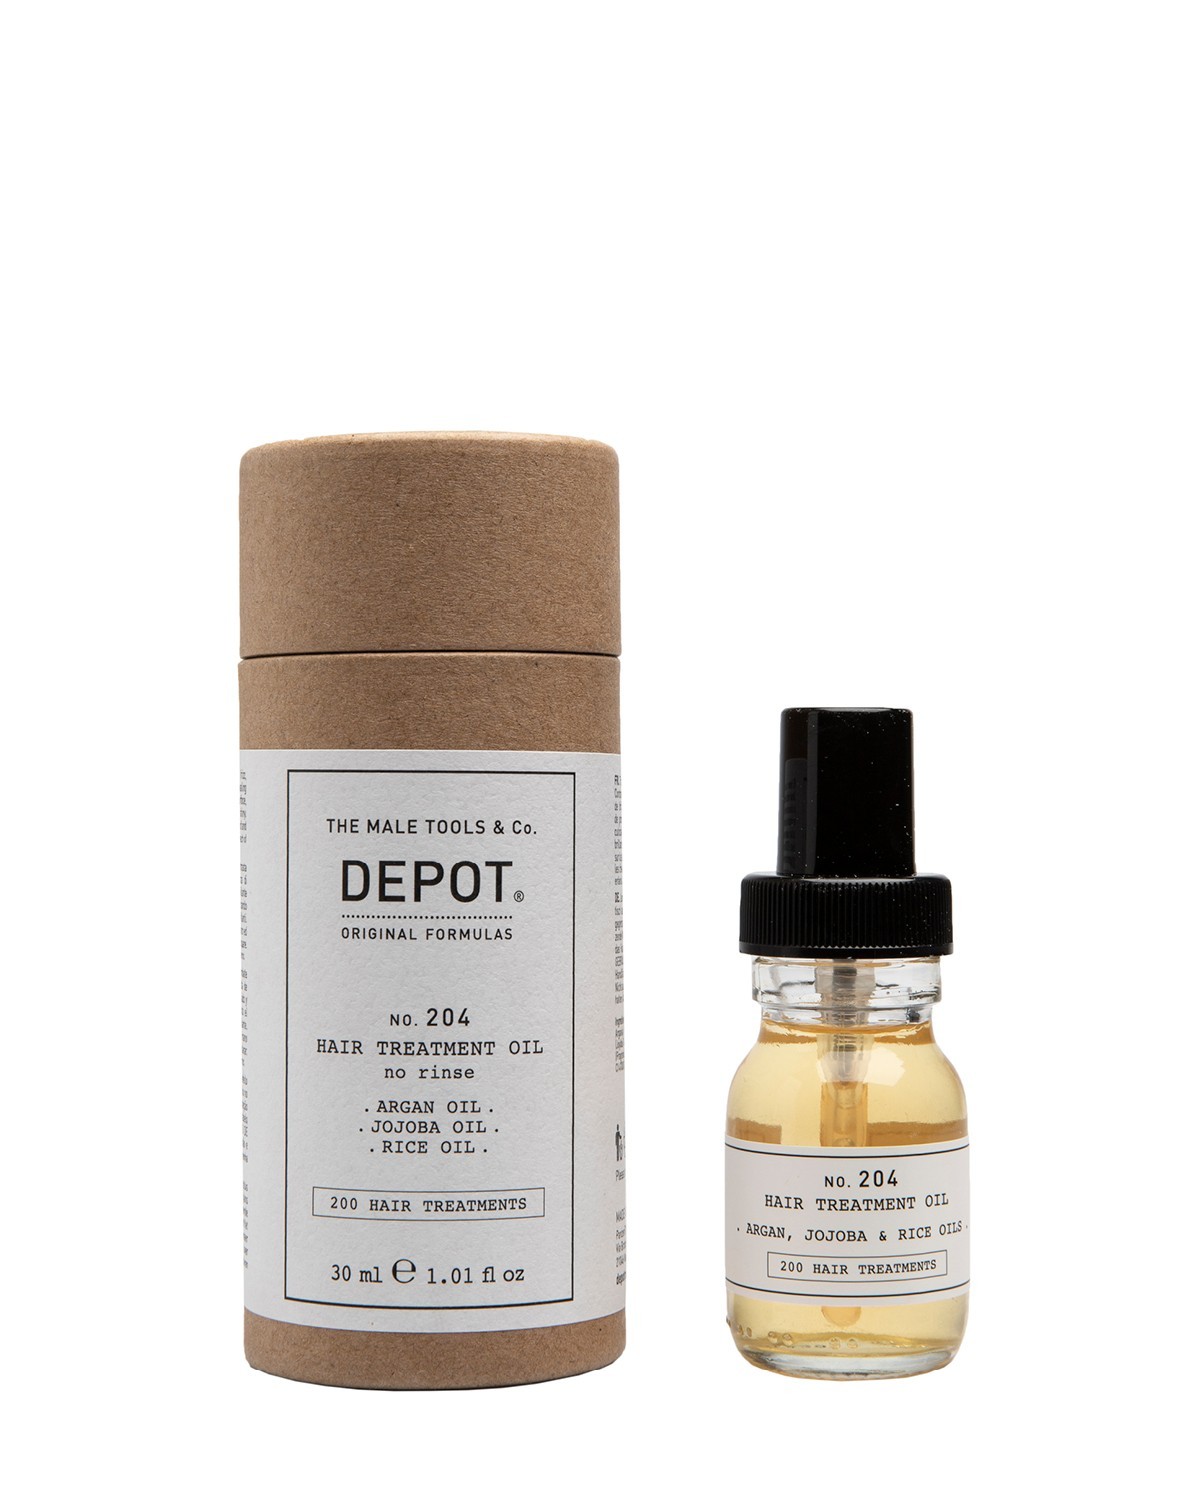 No. 204 Hair Treatment Oil .No Rinse. - DEPOT - THE MALE TOOLS & Co.